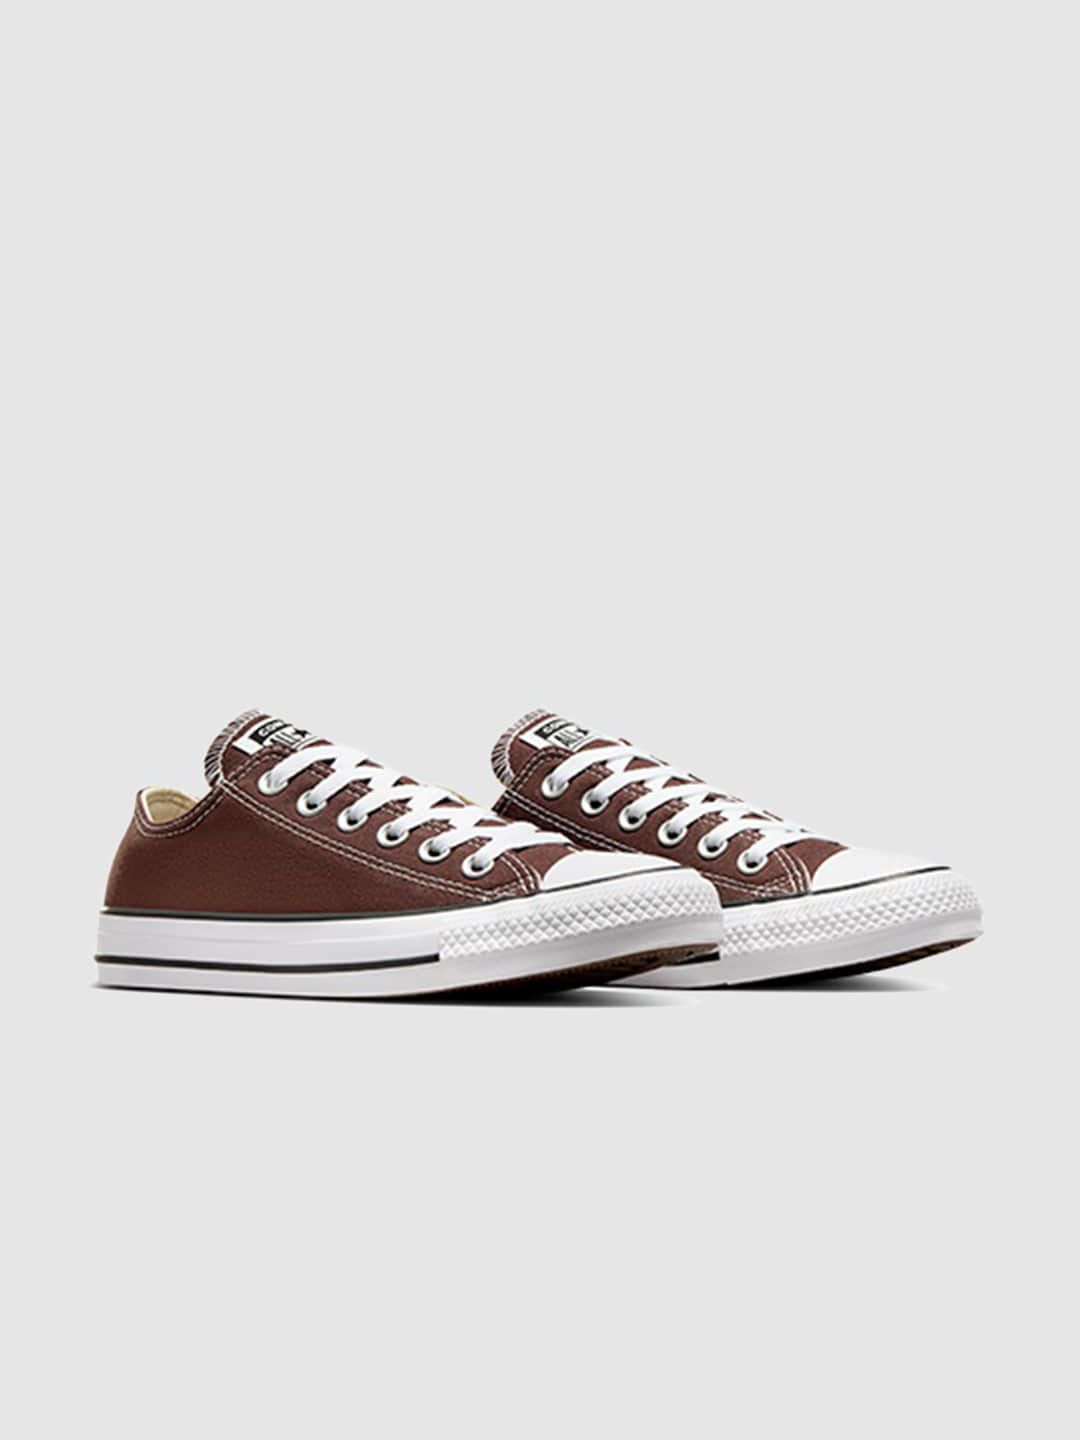 Converse Unisex Round Toe Canvas Sneakers